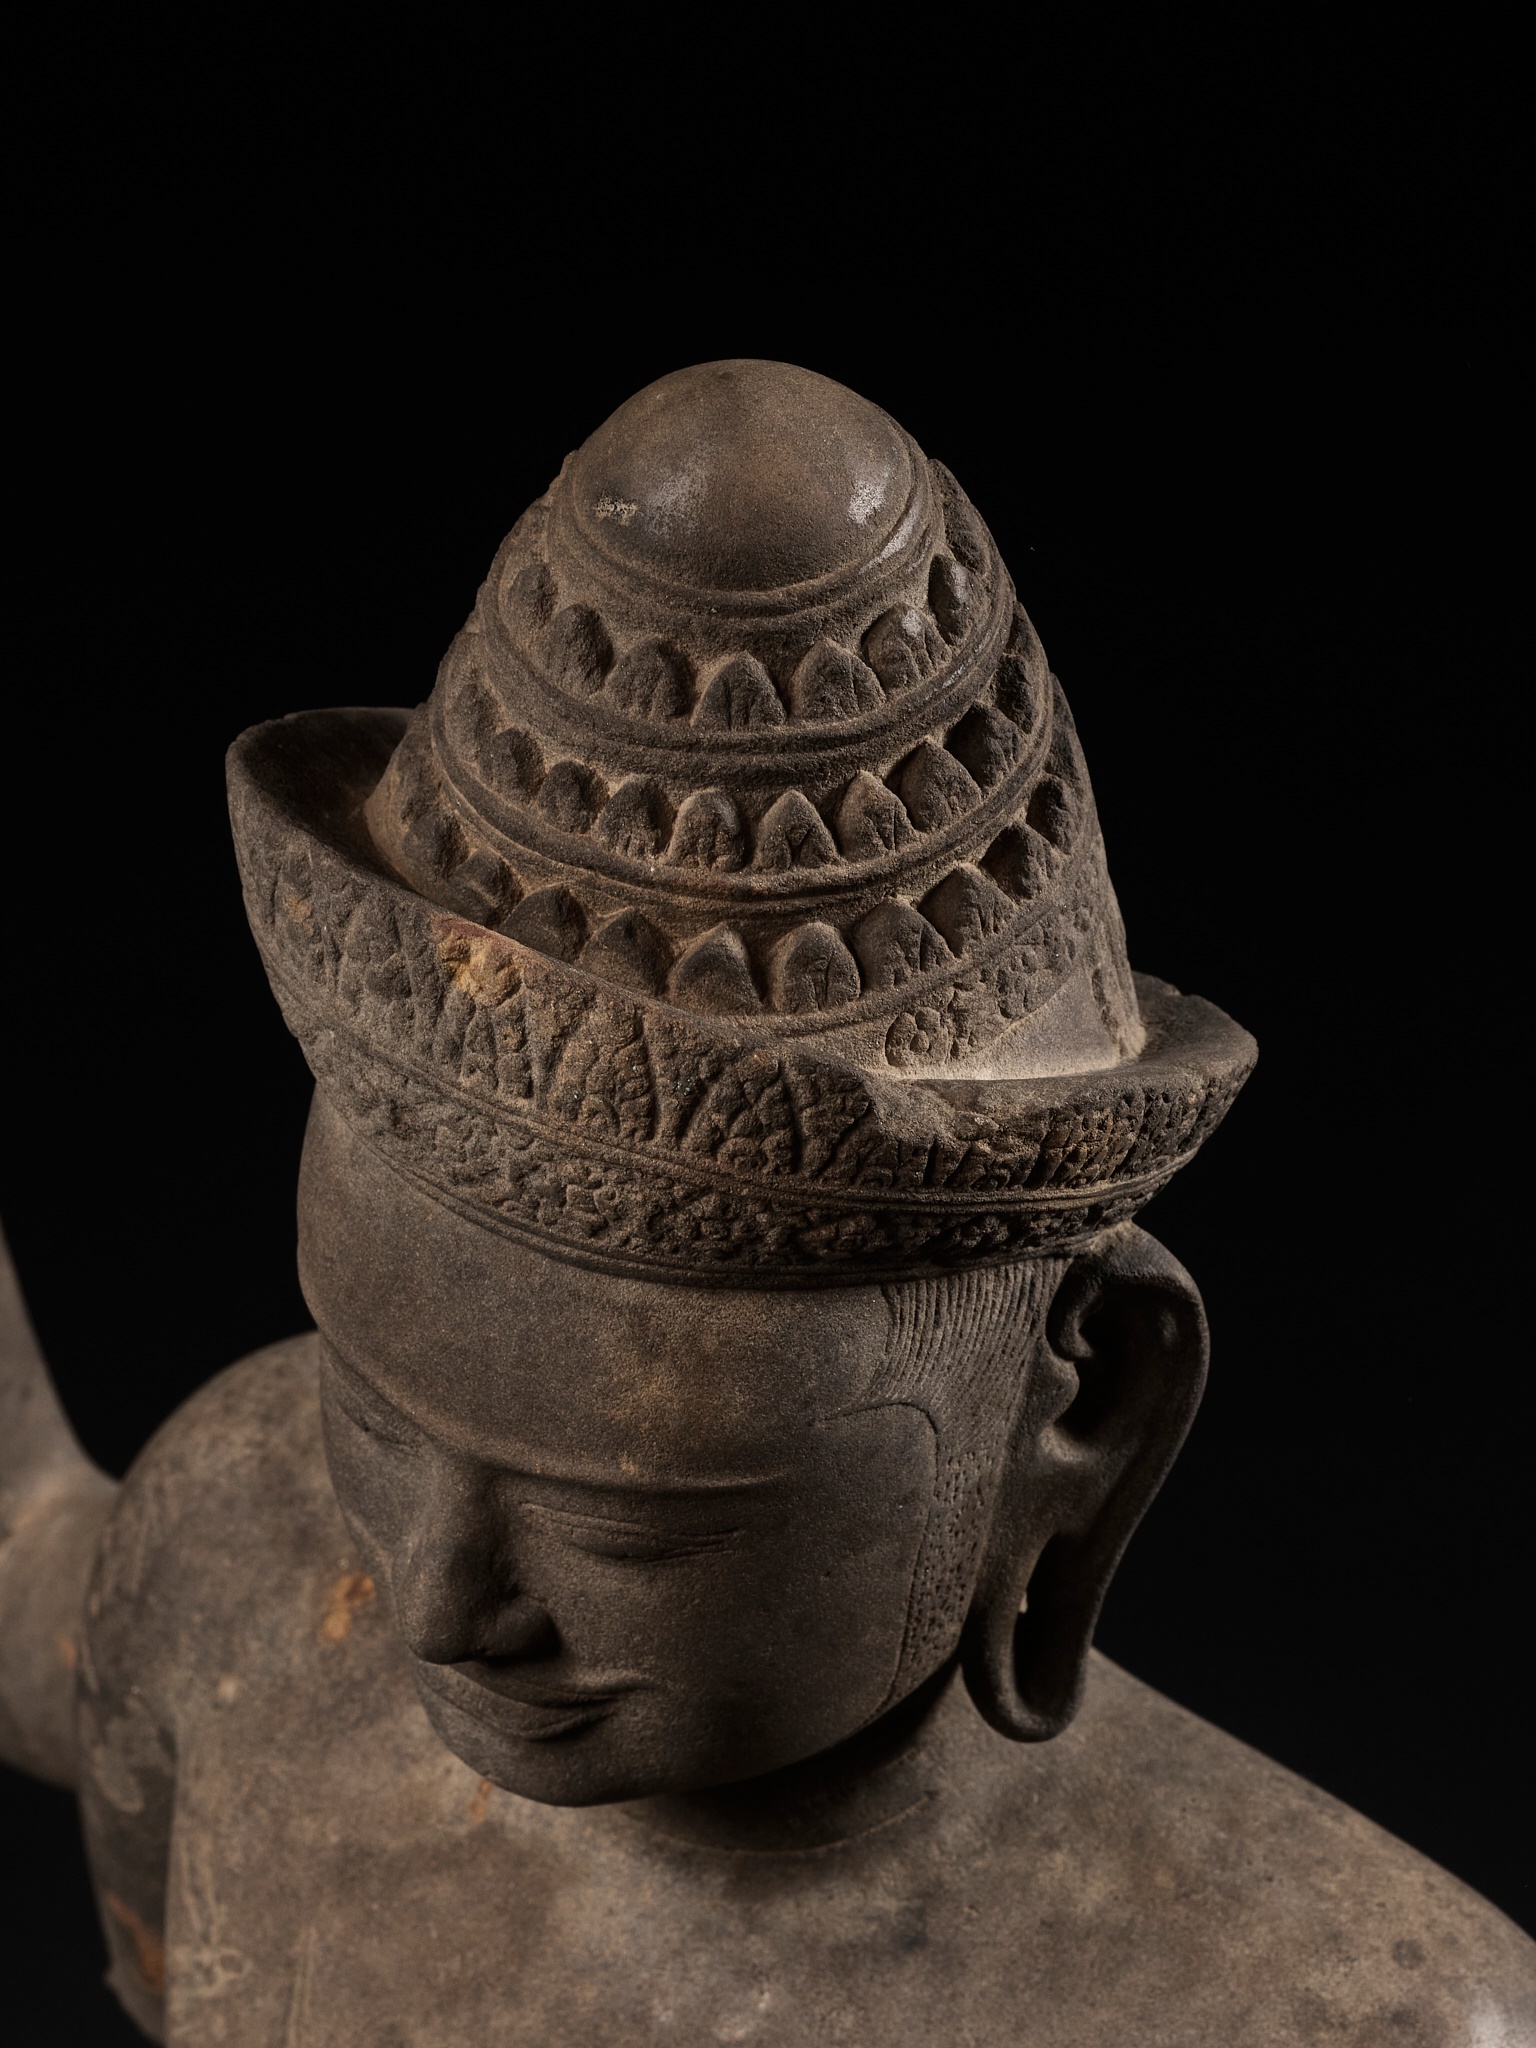 A KHMER SANDSTONE FIGURE OF A MALE DEITY, ANGKOR PERIOD - Image 2 of 13